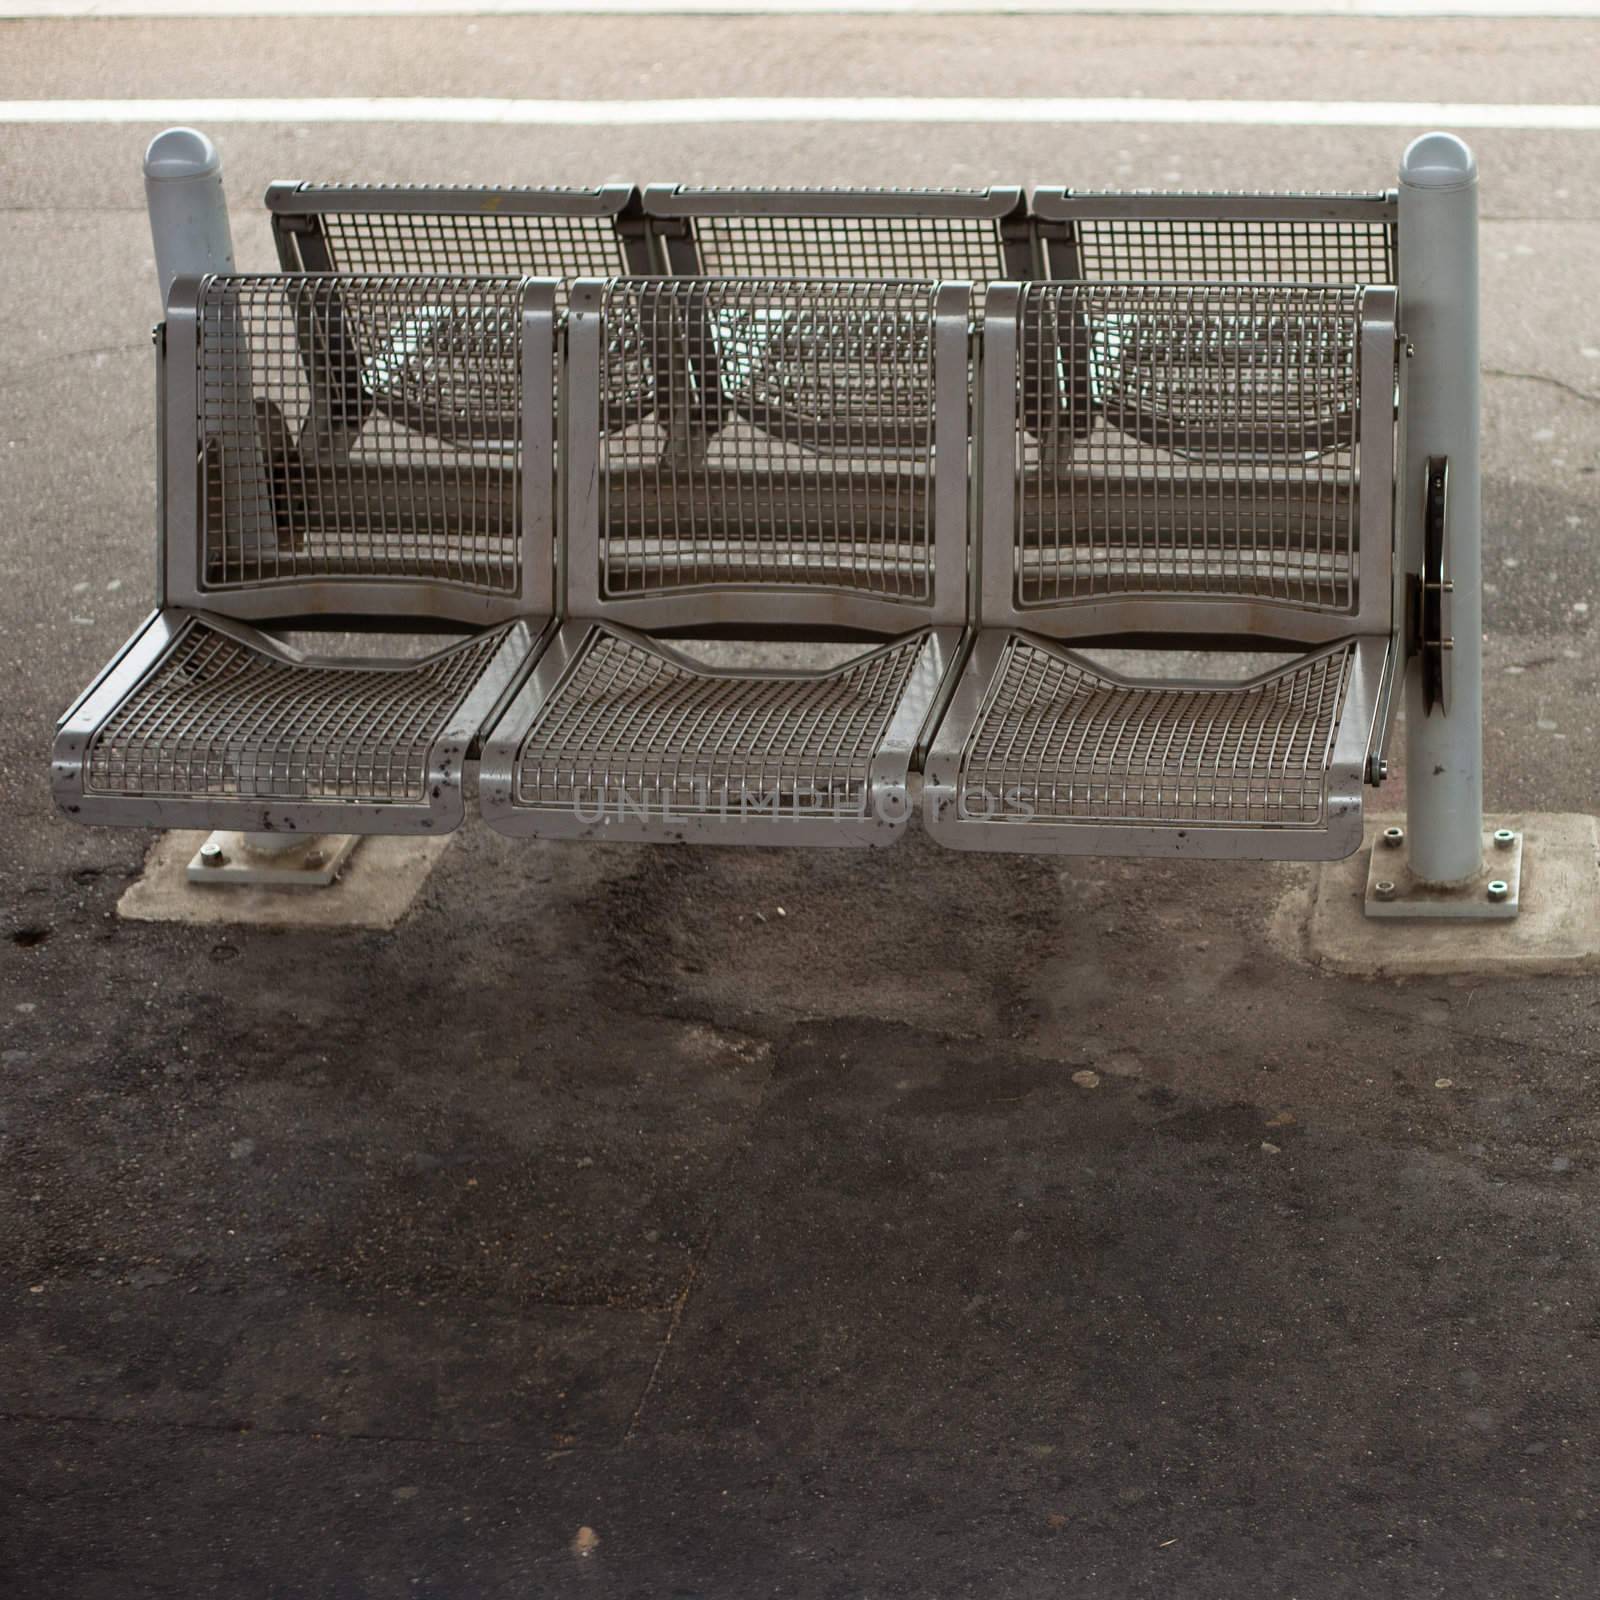 Empty steel bench bolted down on concrete platform.